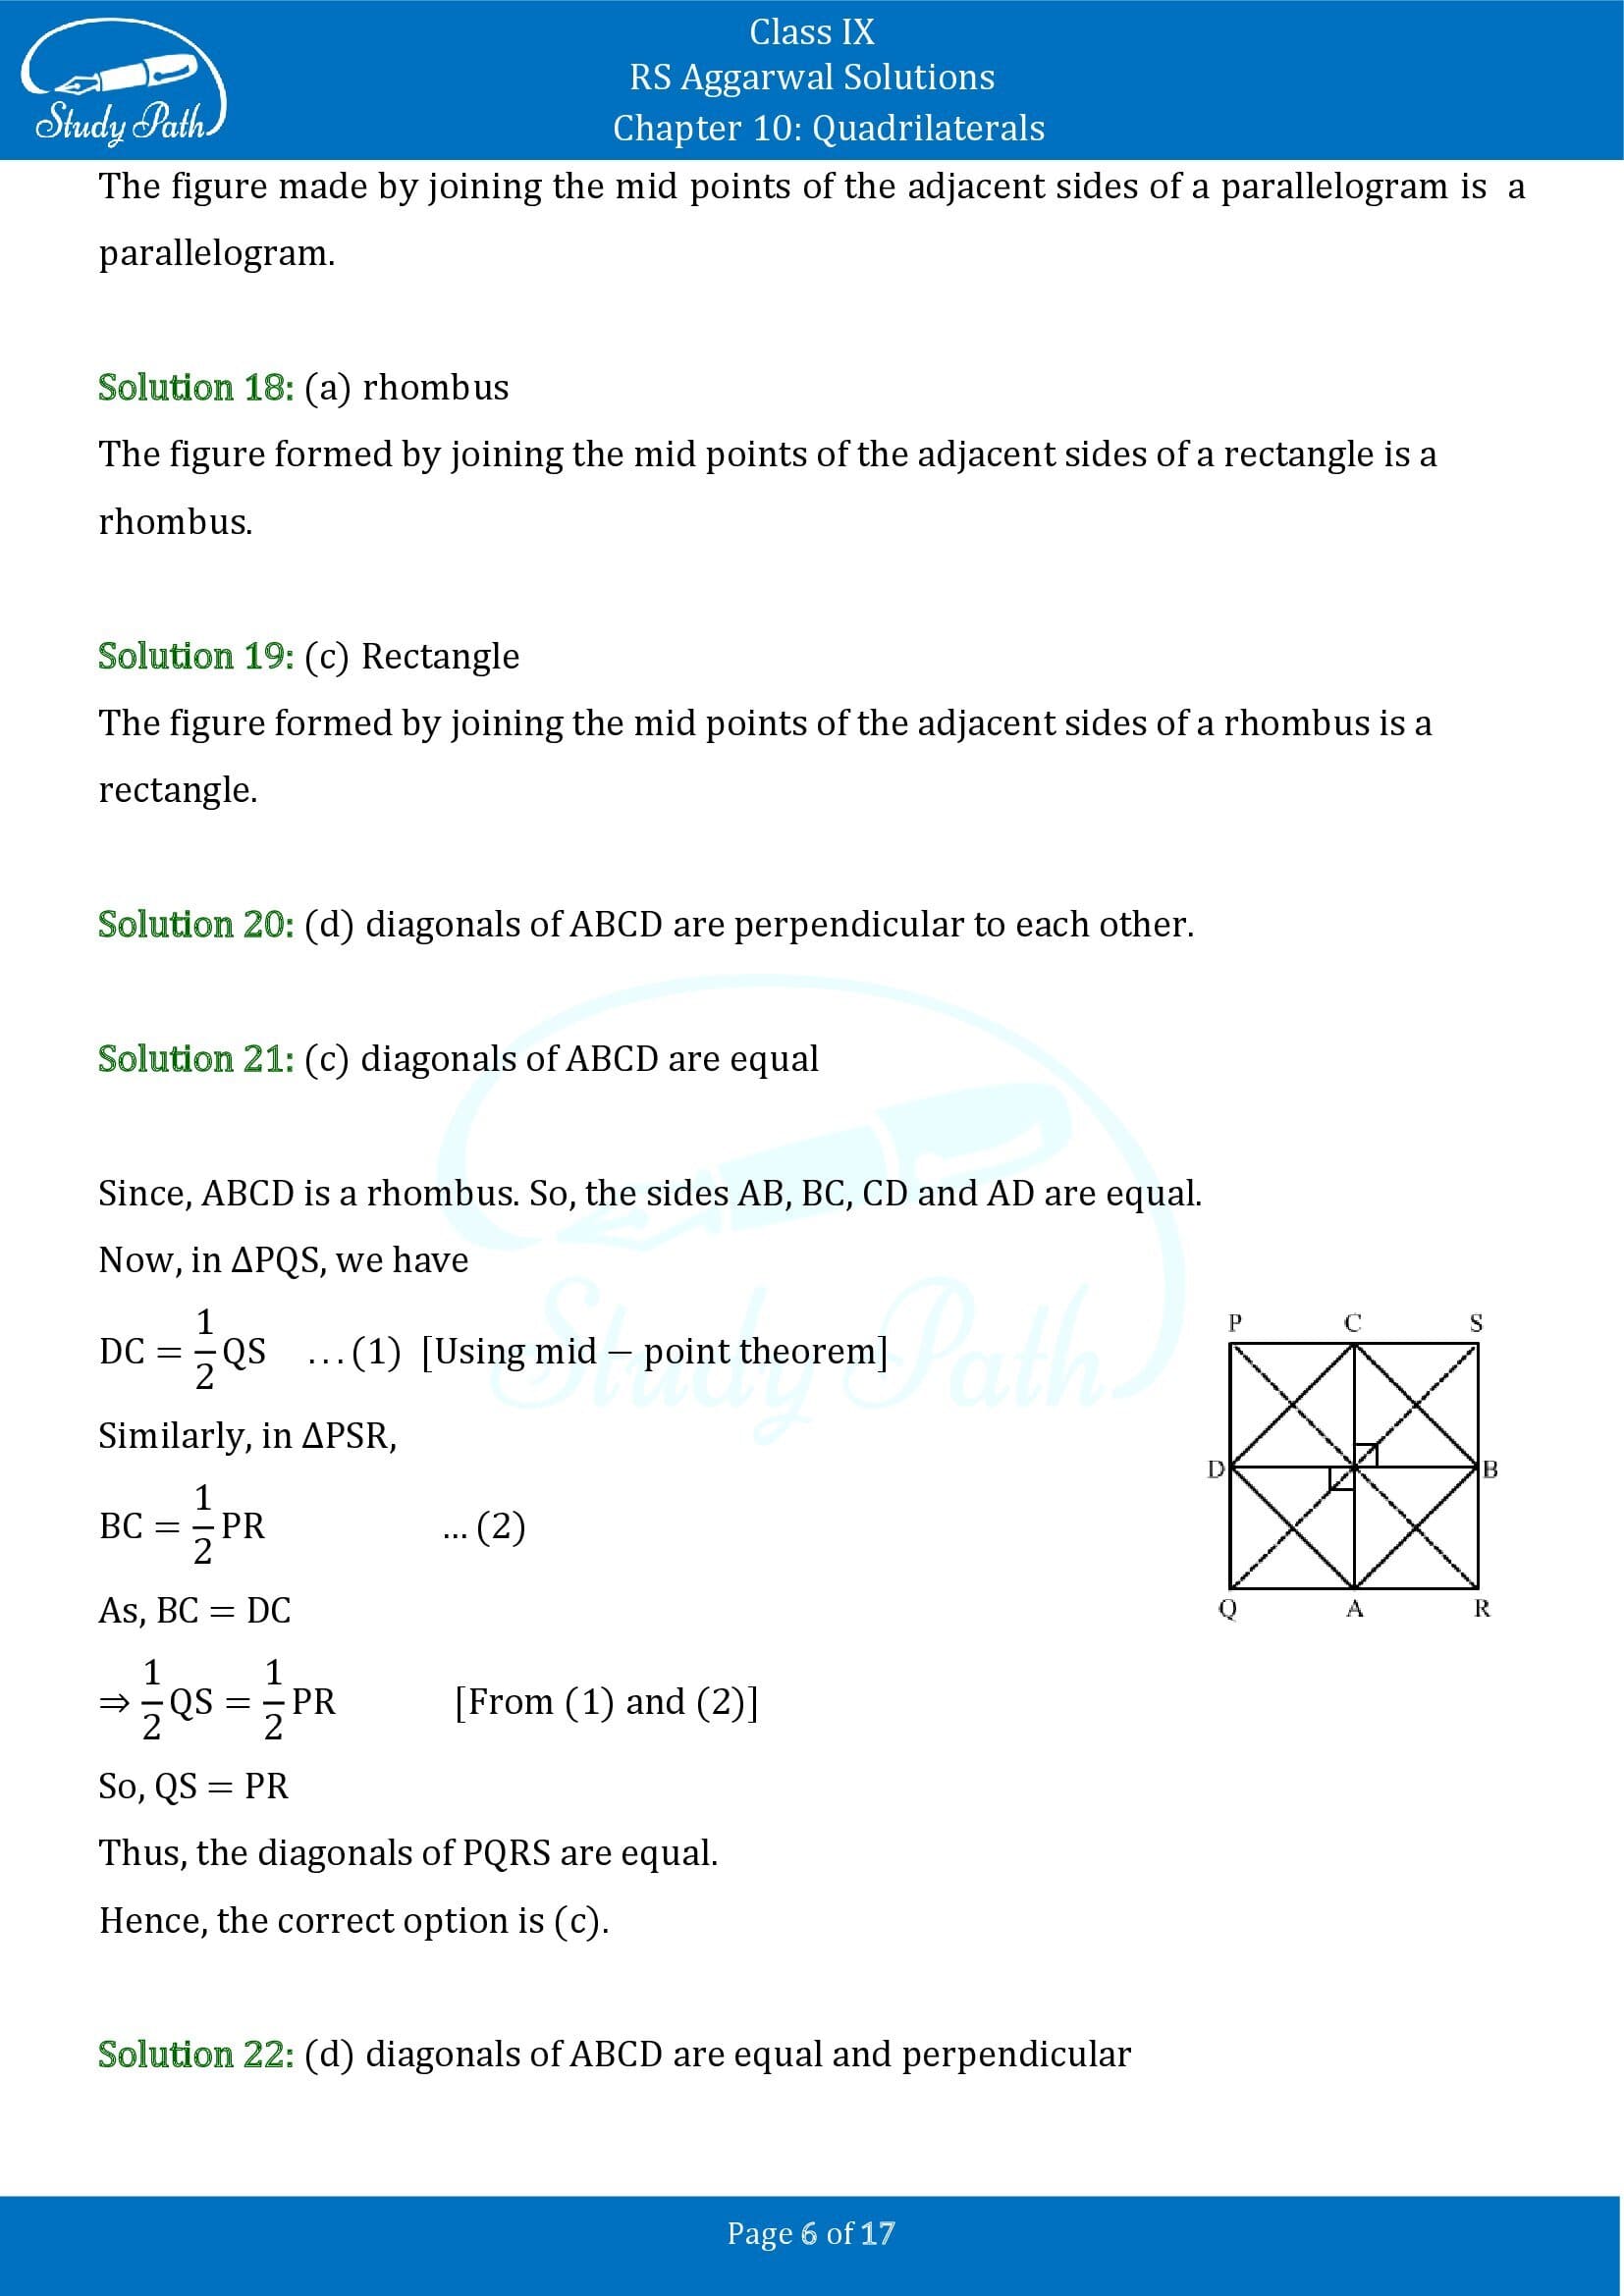 RS Aggarwal Solutions Class 9 Chapter 10 Quadrilaterals Multiple Choice Questions MCQs 00006